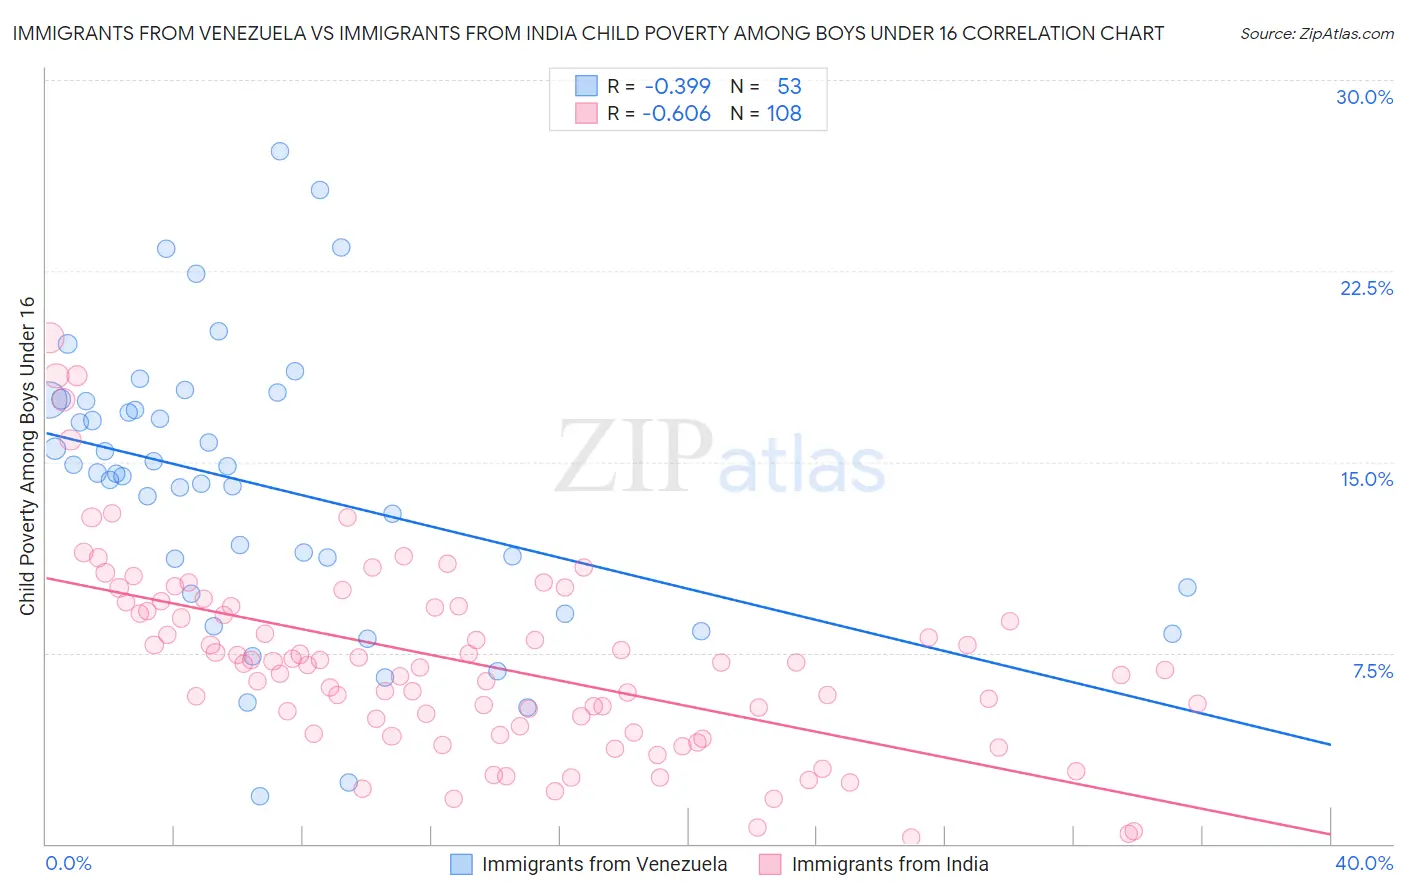 Immigrants from Venezuela vs Immigrants from India Child Poverty Among Boys Under 16